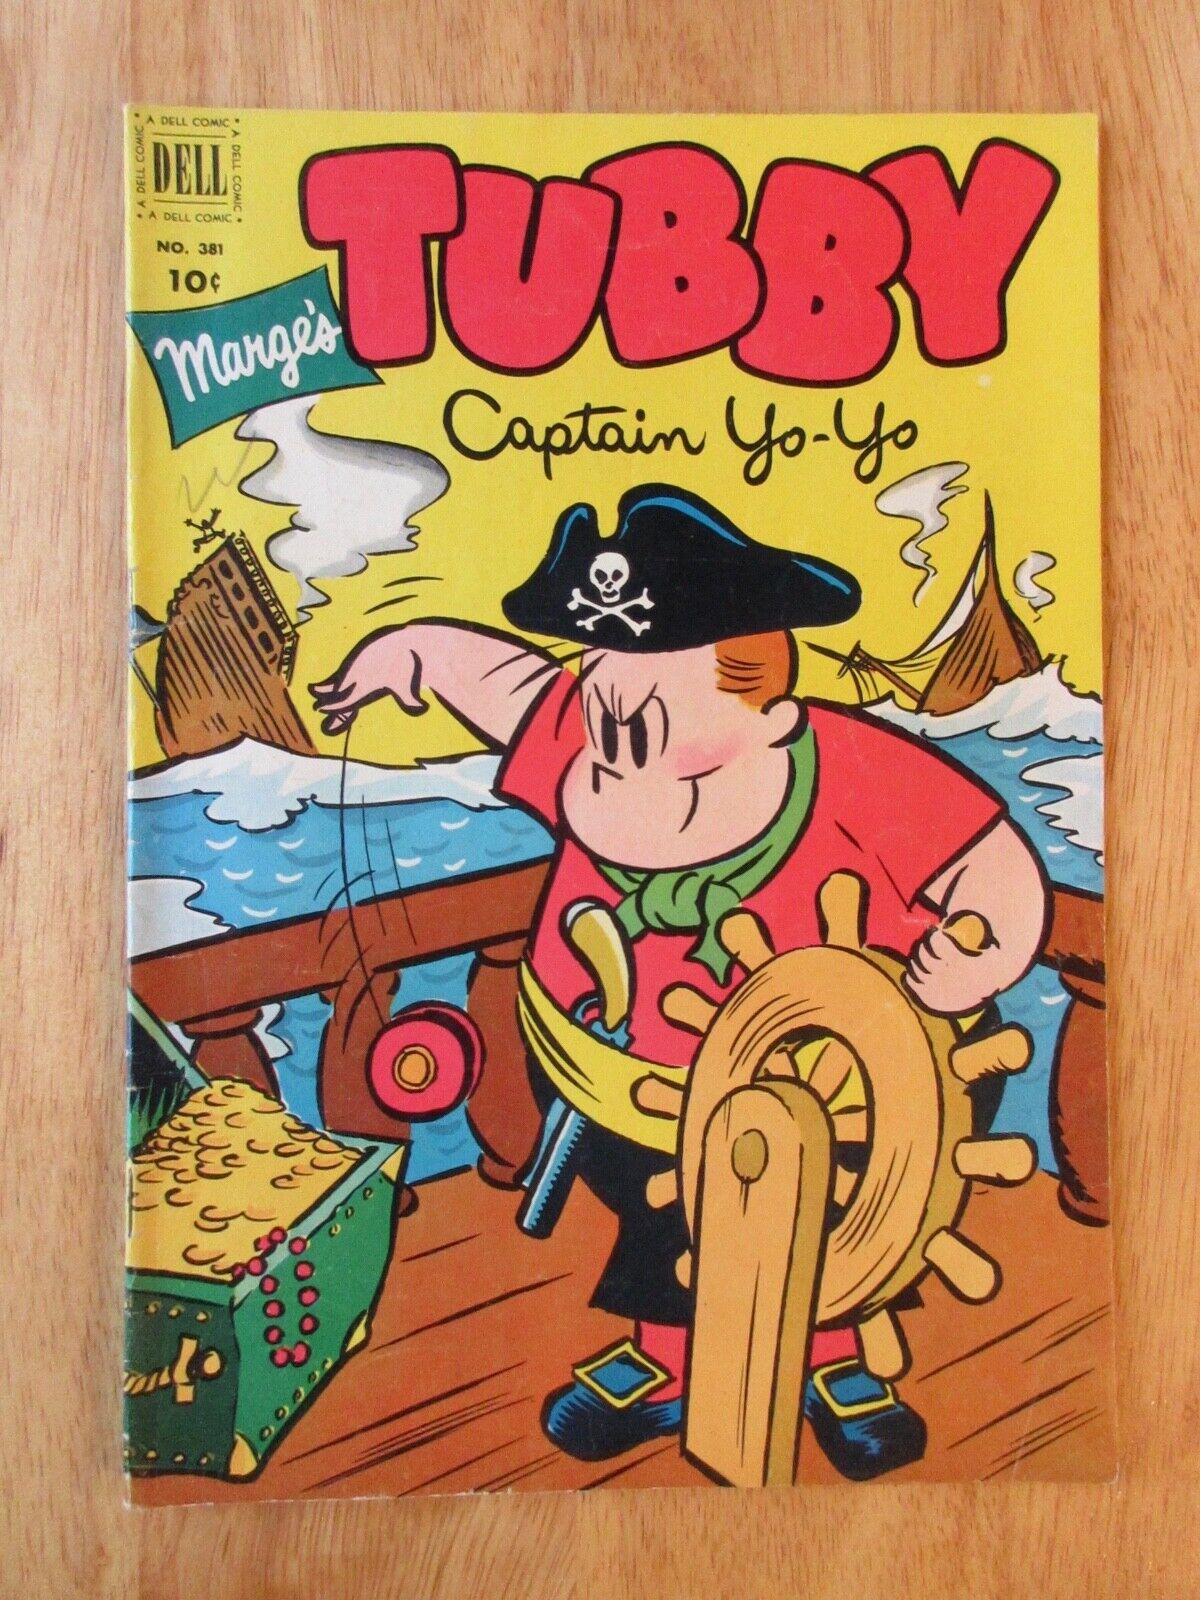 Dell Comics Key! TUBBY (LITTLE LULU) Four-Color #381 (#1!) 1952 (FN+/FN++)